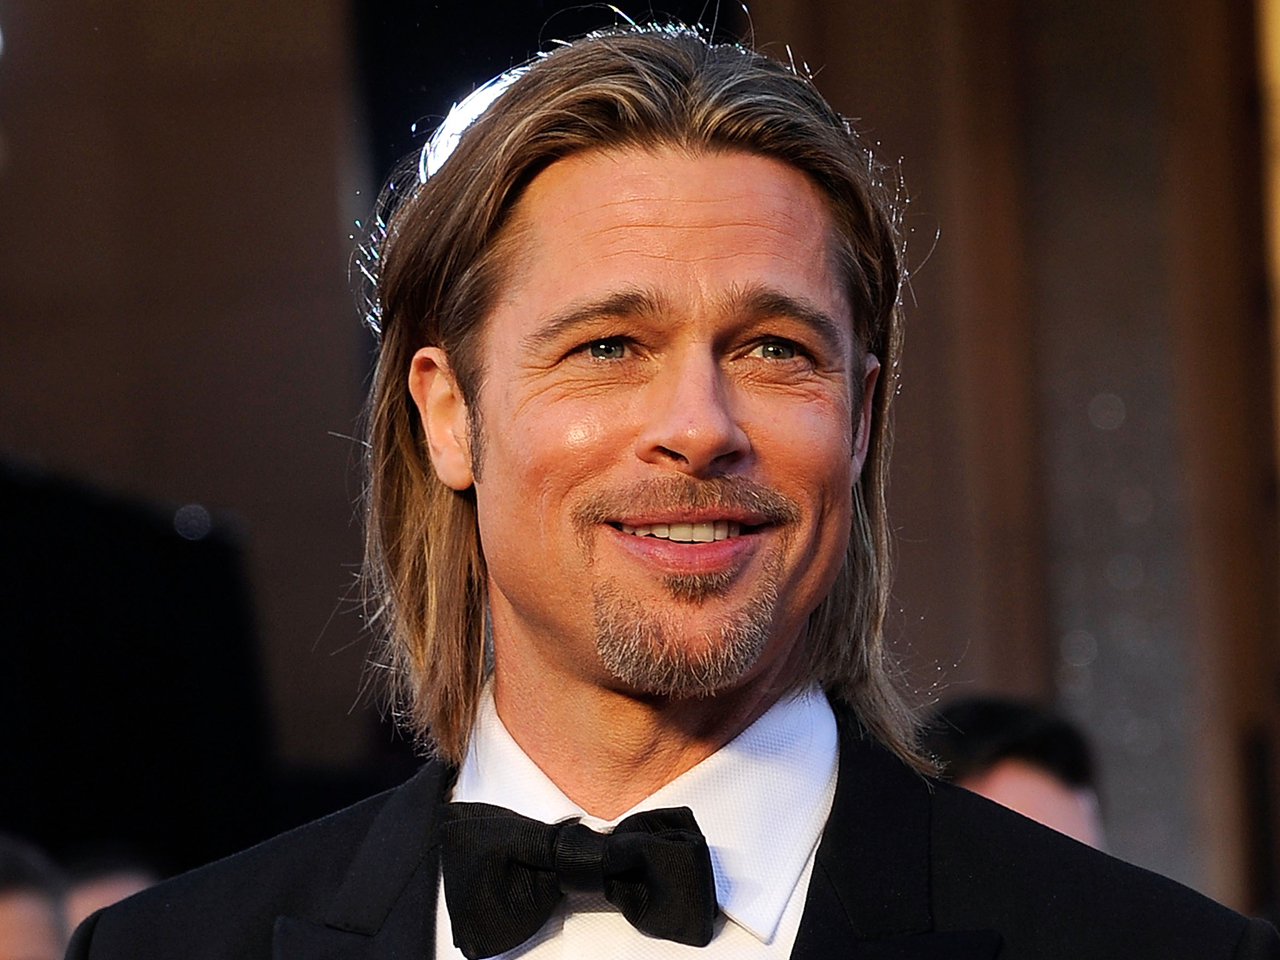 Brad Pitt to be the new face of Chanel No. 5 - CBS News